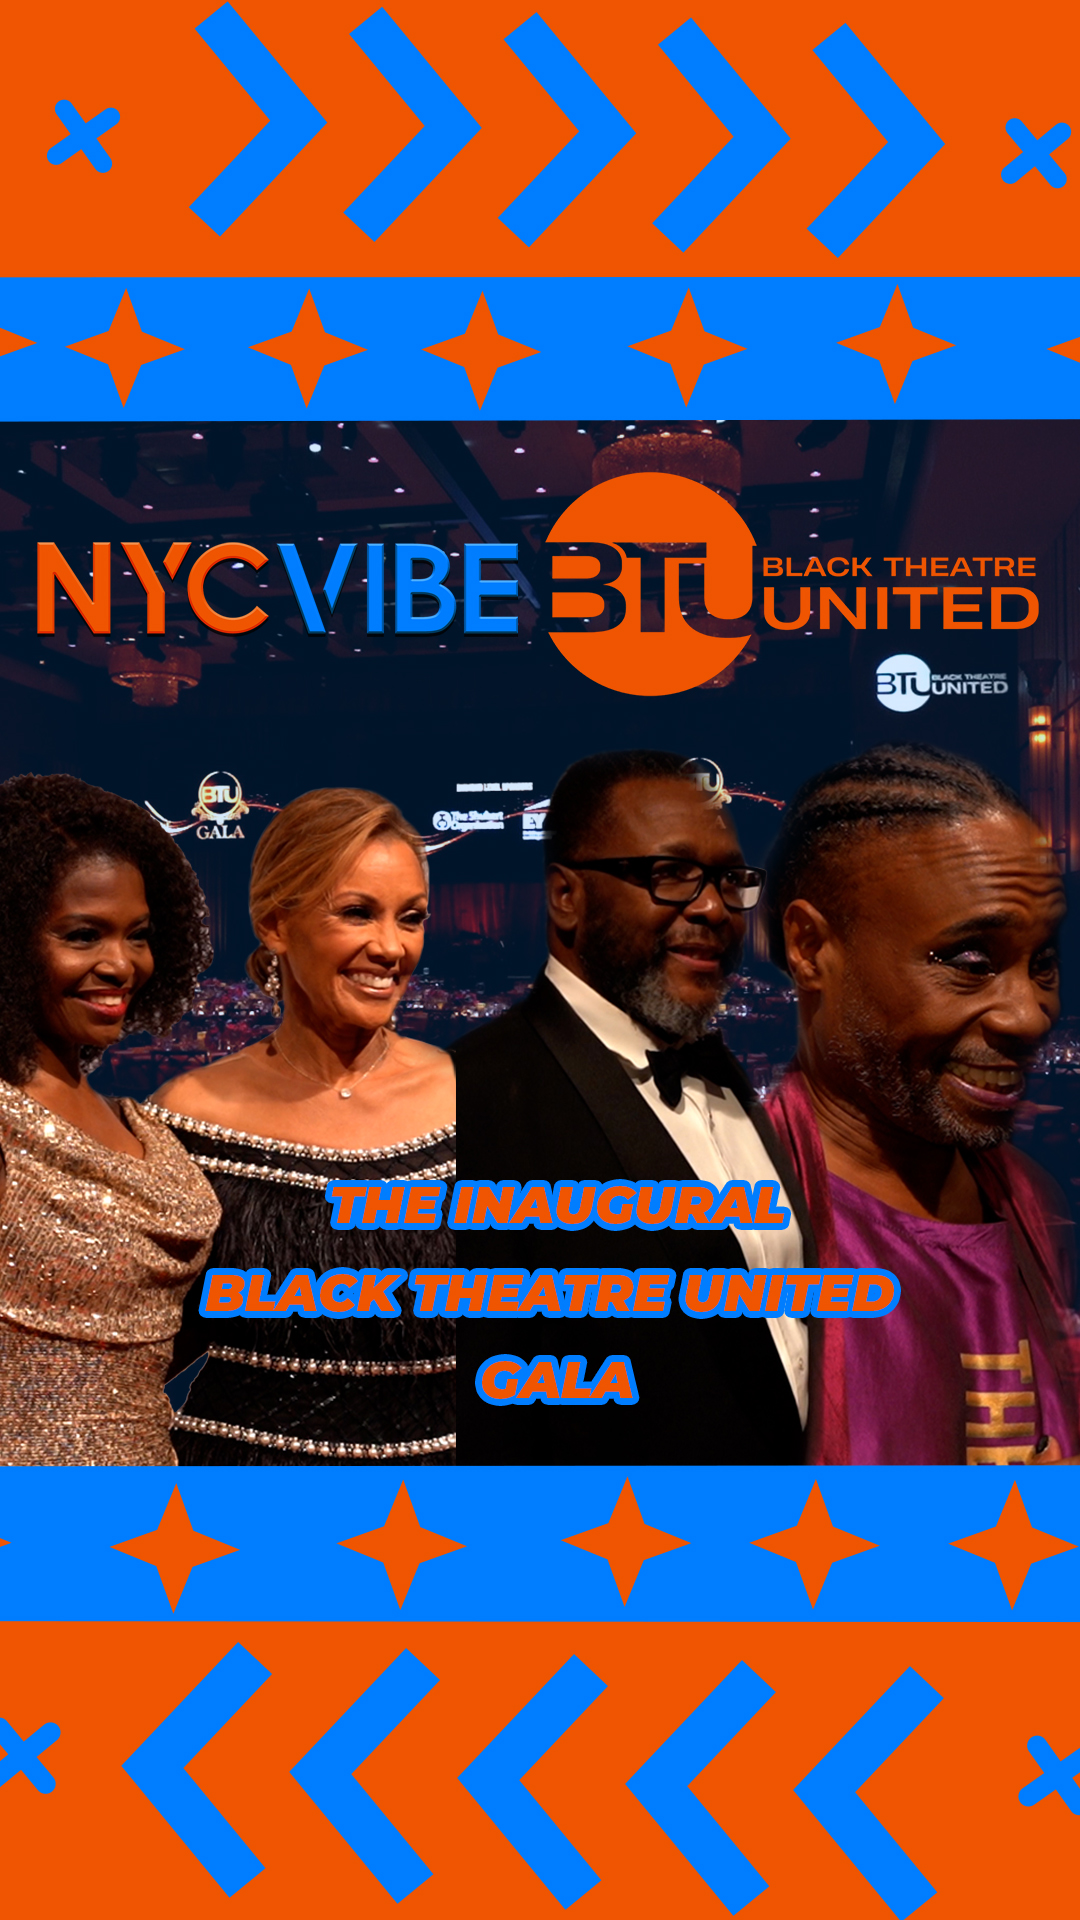 Black Theatre United Celebrated its inaugural Gala - The Theme “A Solute to Broadway Legends: Past, Present, and Future #broadway #blacktheater #nyc #fyp #theater #theatre